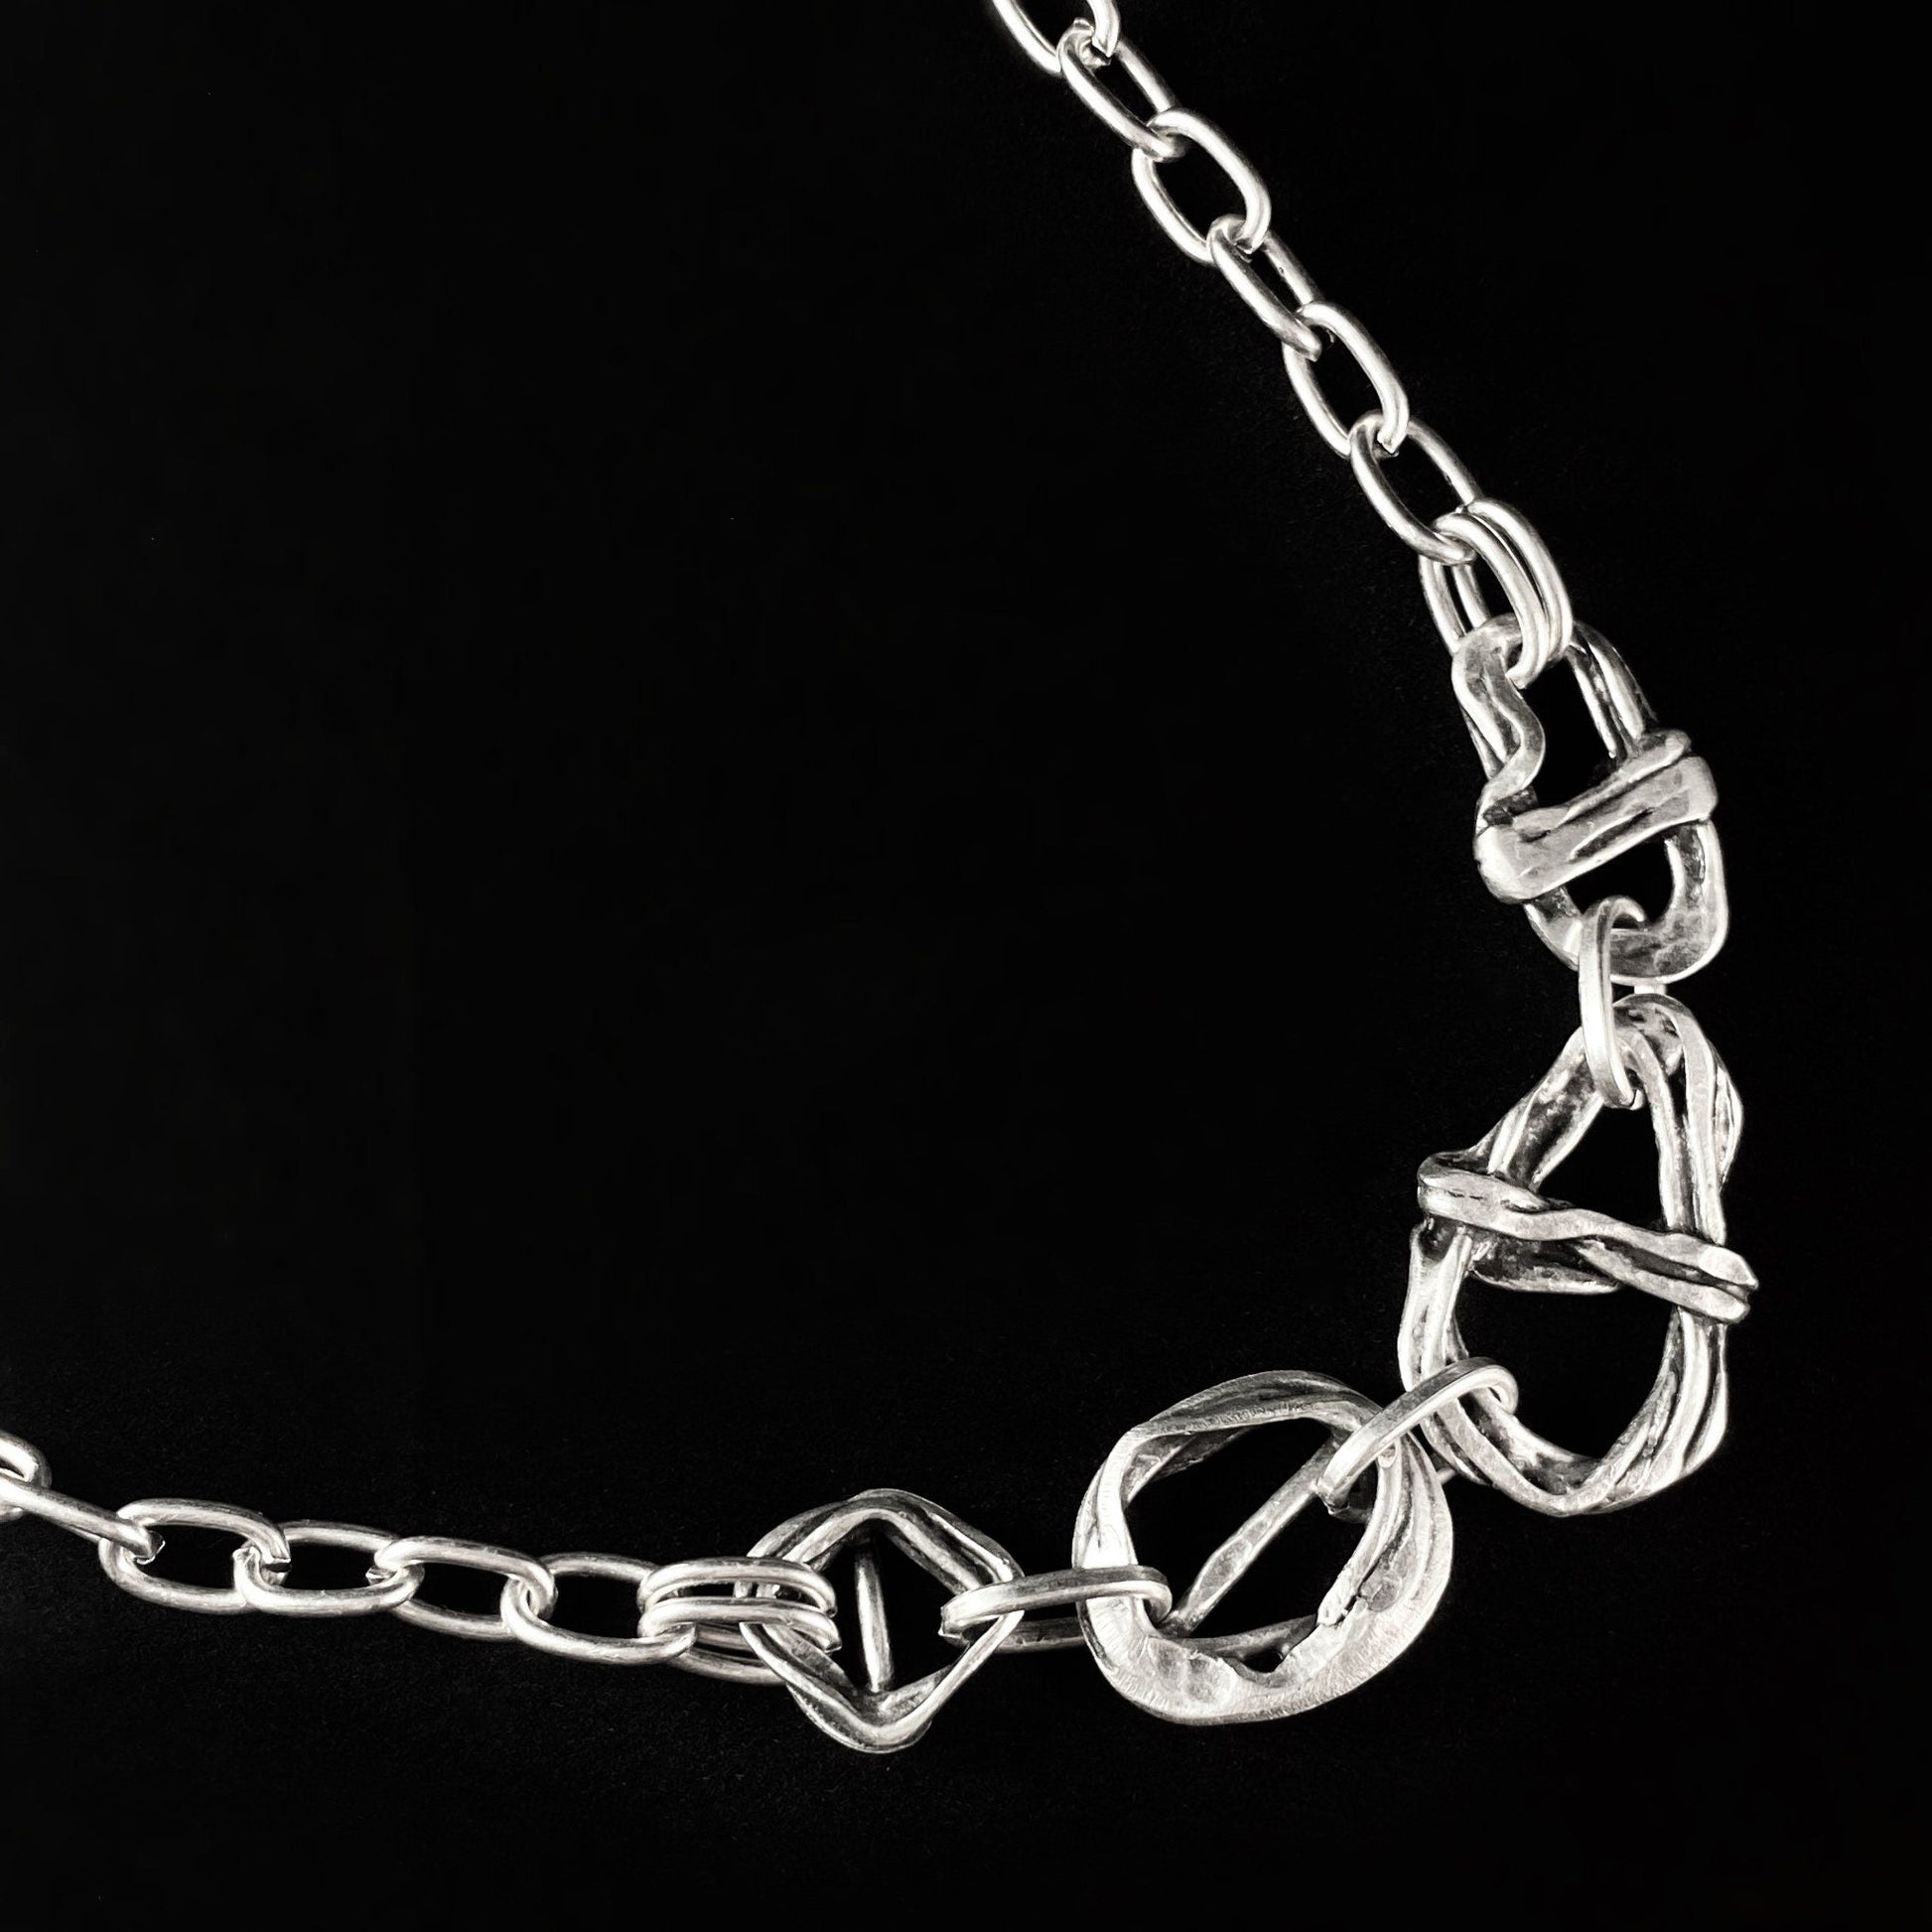 Silver Chain Link Abstract Necklace, Handmade, Nickel Free-Noir